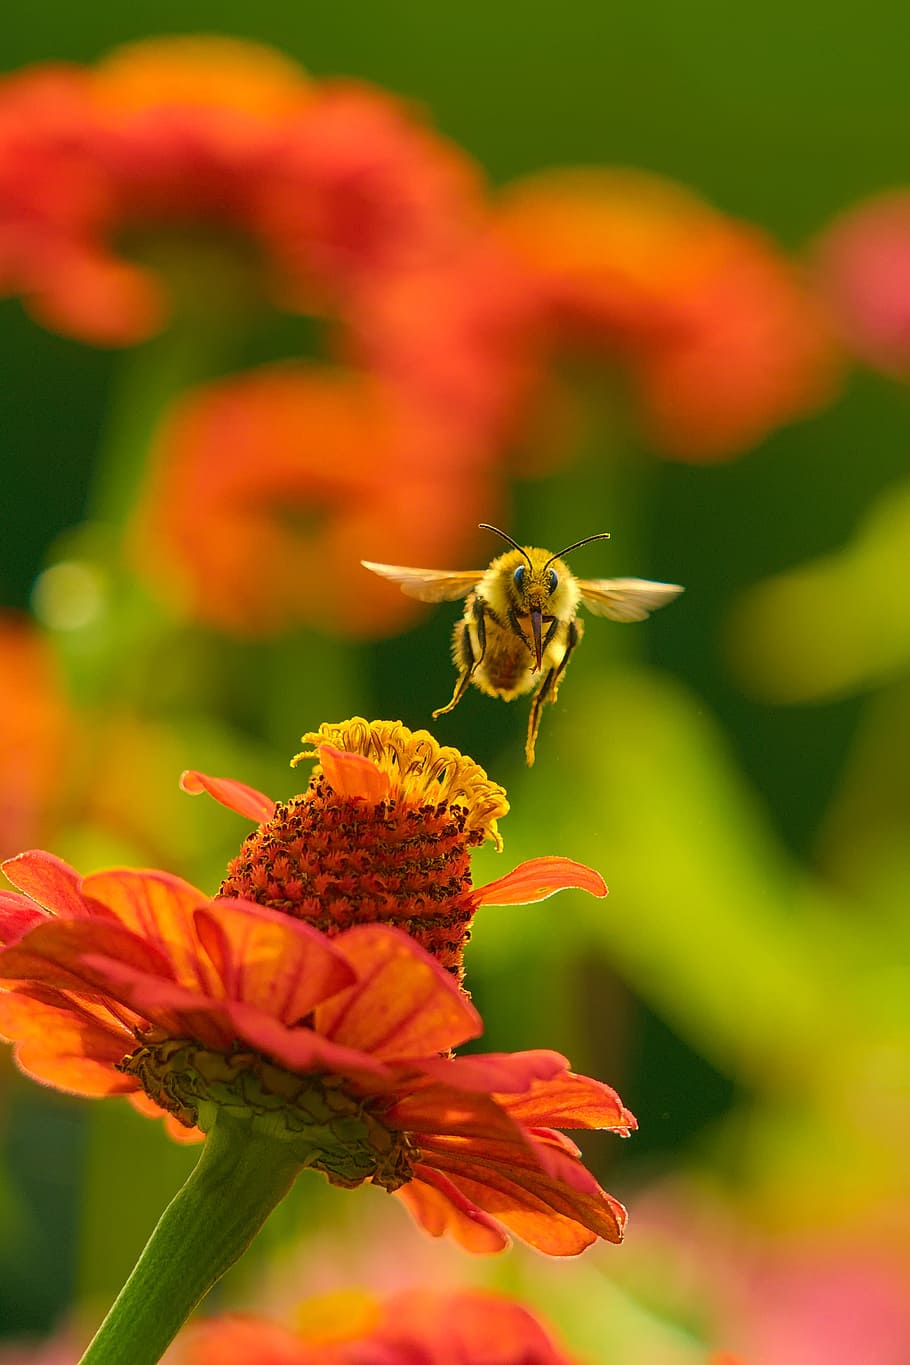 bee, flower, nature, garden, insect, natural, nectar, pollen, flying, flowering plant